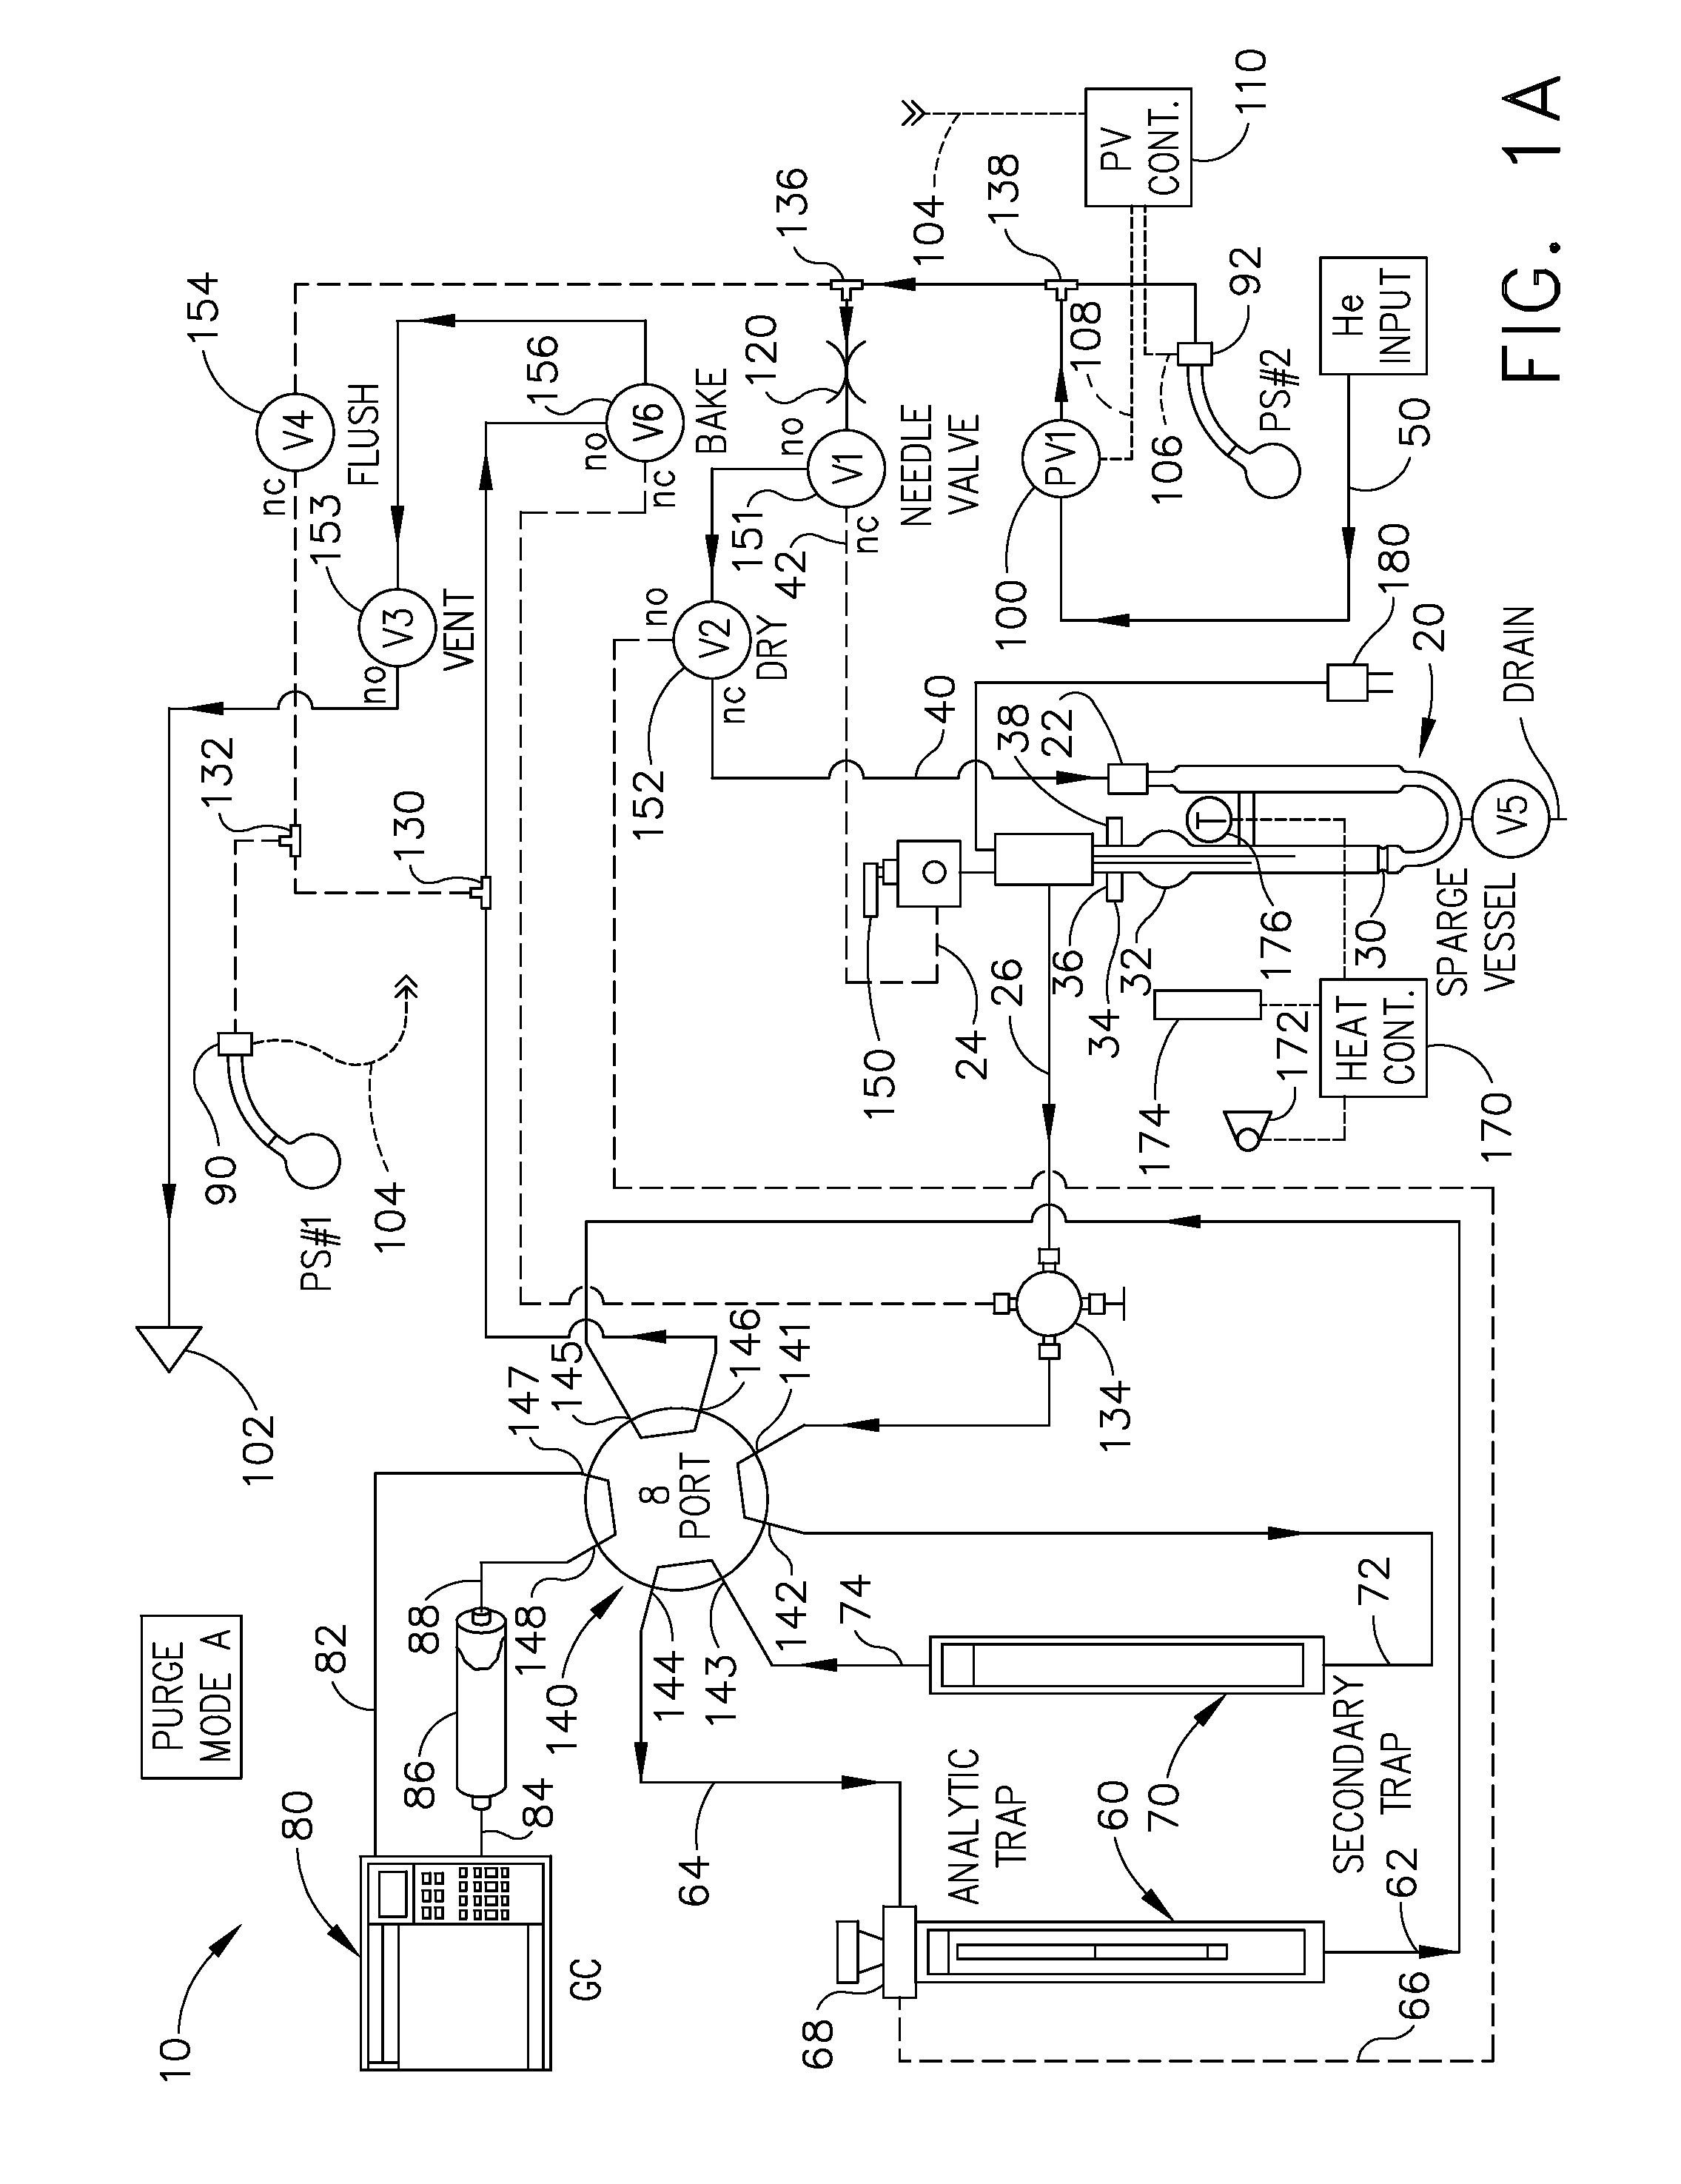 Analytical chemical sampling system with sparge vessel